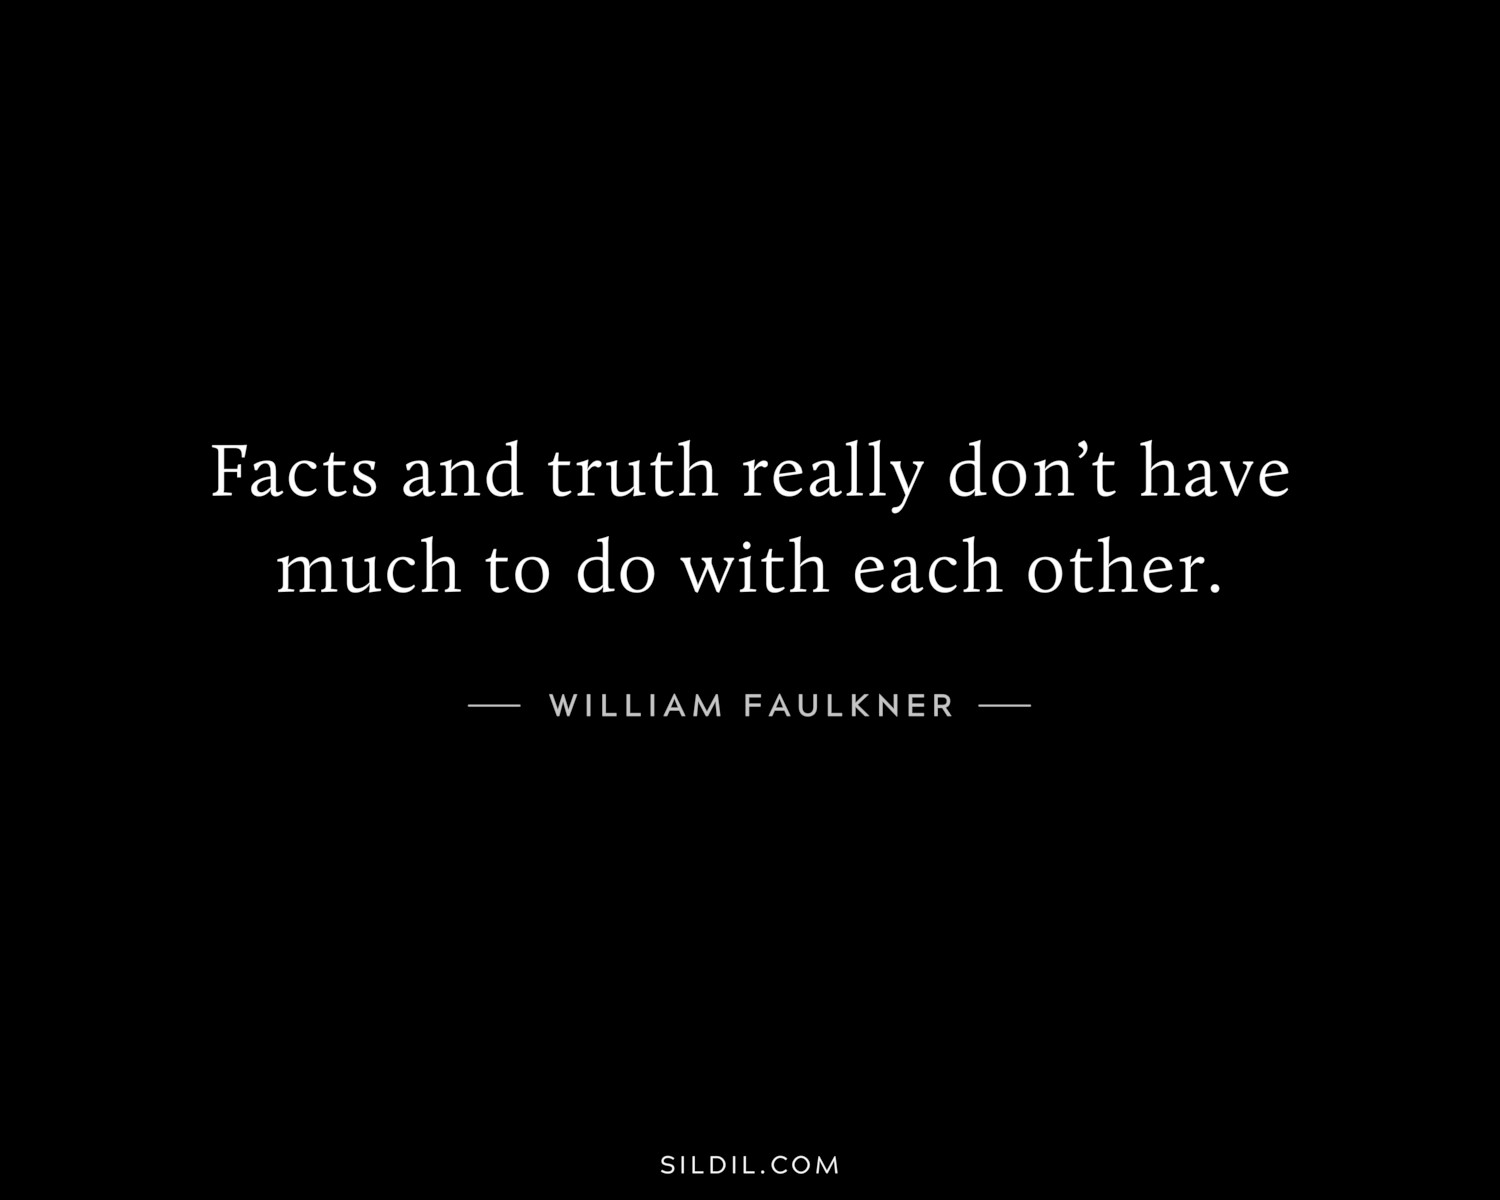 Facts and truth really don’t have much to do with each other.